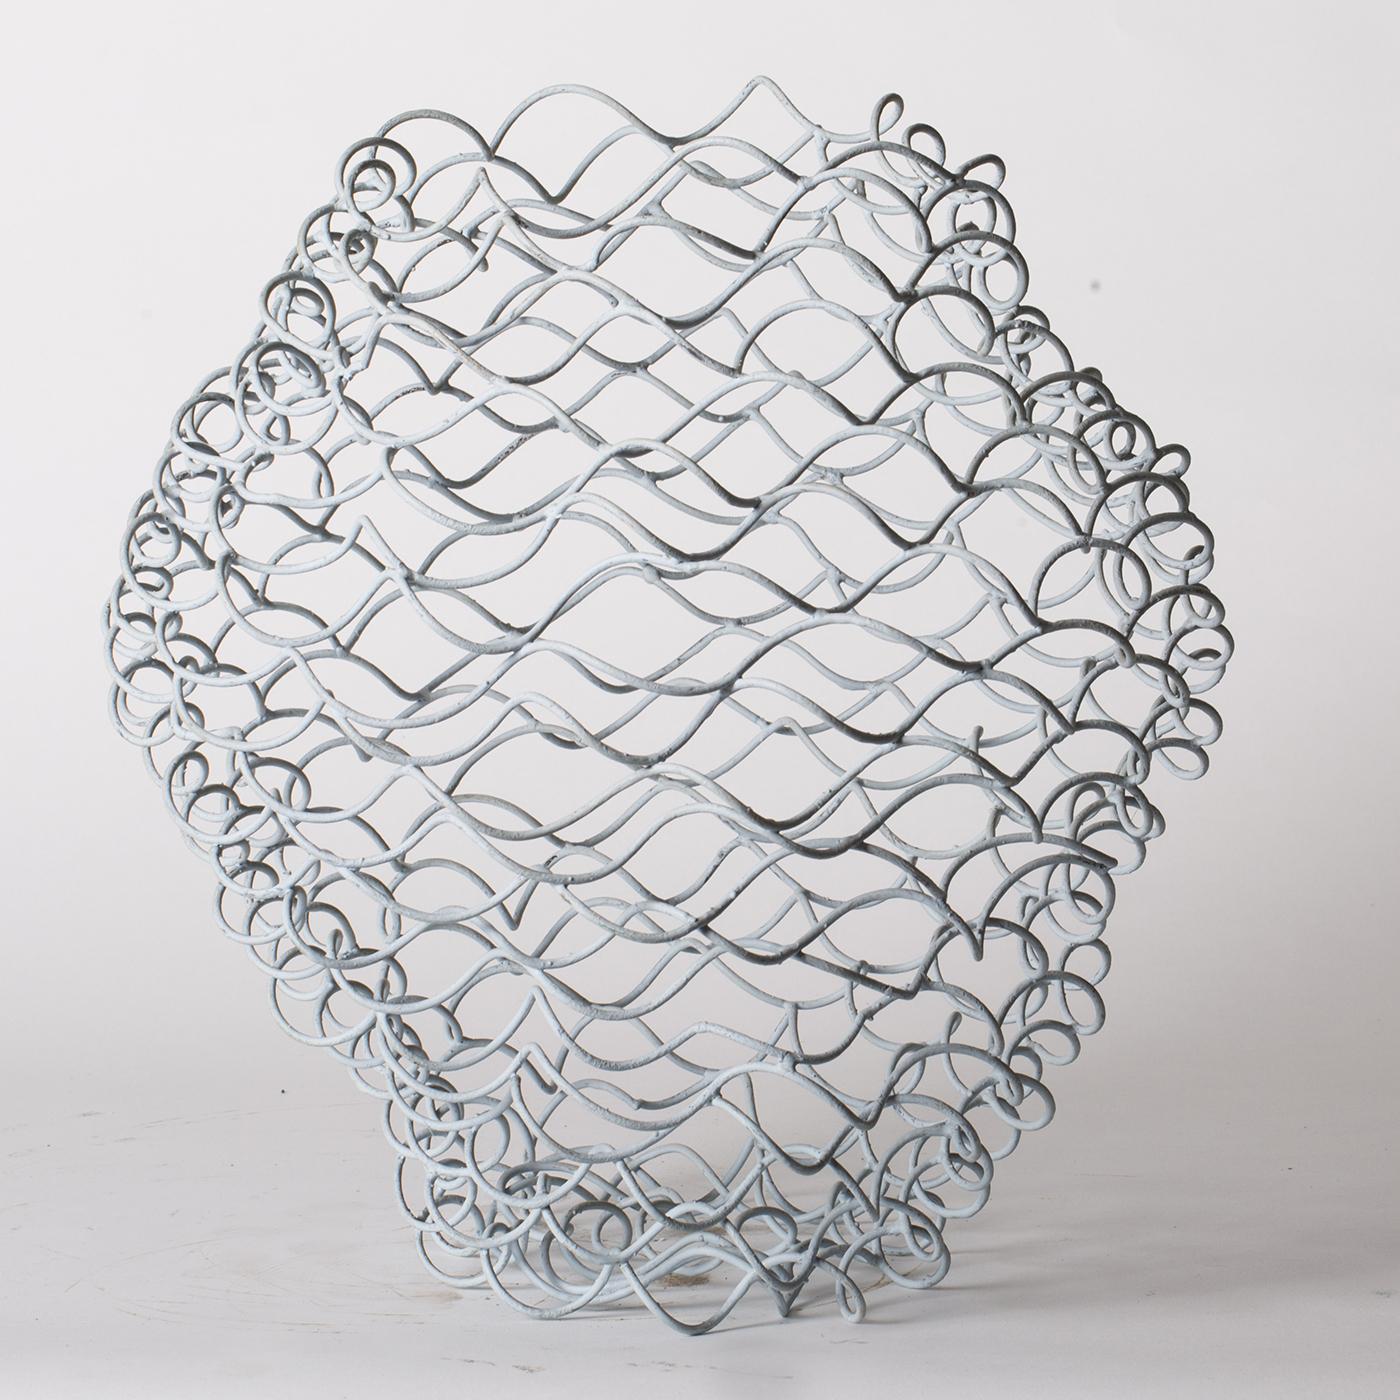 This abstract vase by Sciortino is formed of tempered iron wire and has a painted finish in varying shades of light blue. Product dimensions may vary slightly.